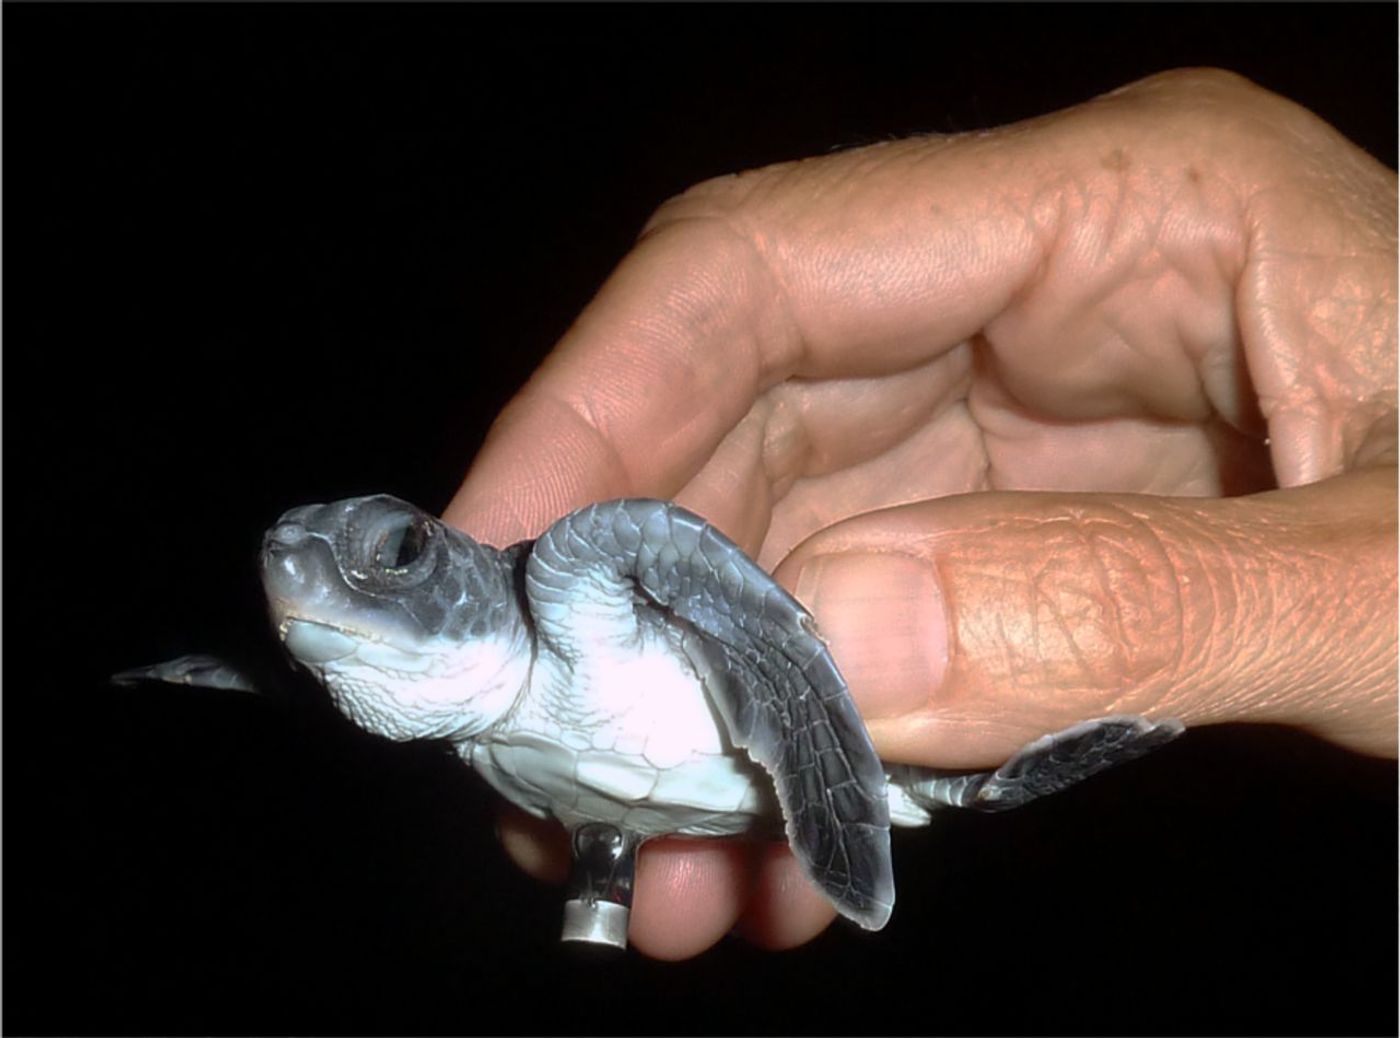 Baby sea turtles rely on natural light to get to the safety of the ocean, but artificial light pollution could make it much harder on them.